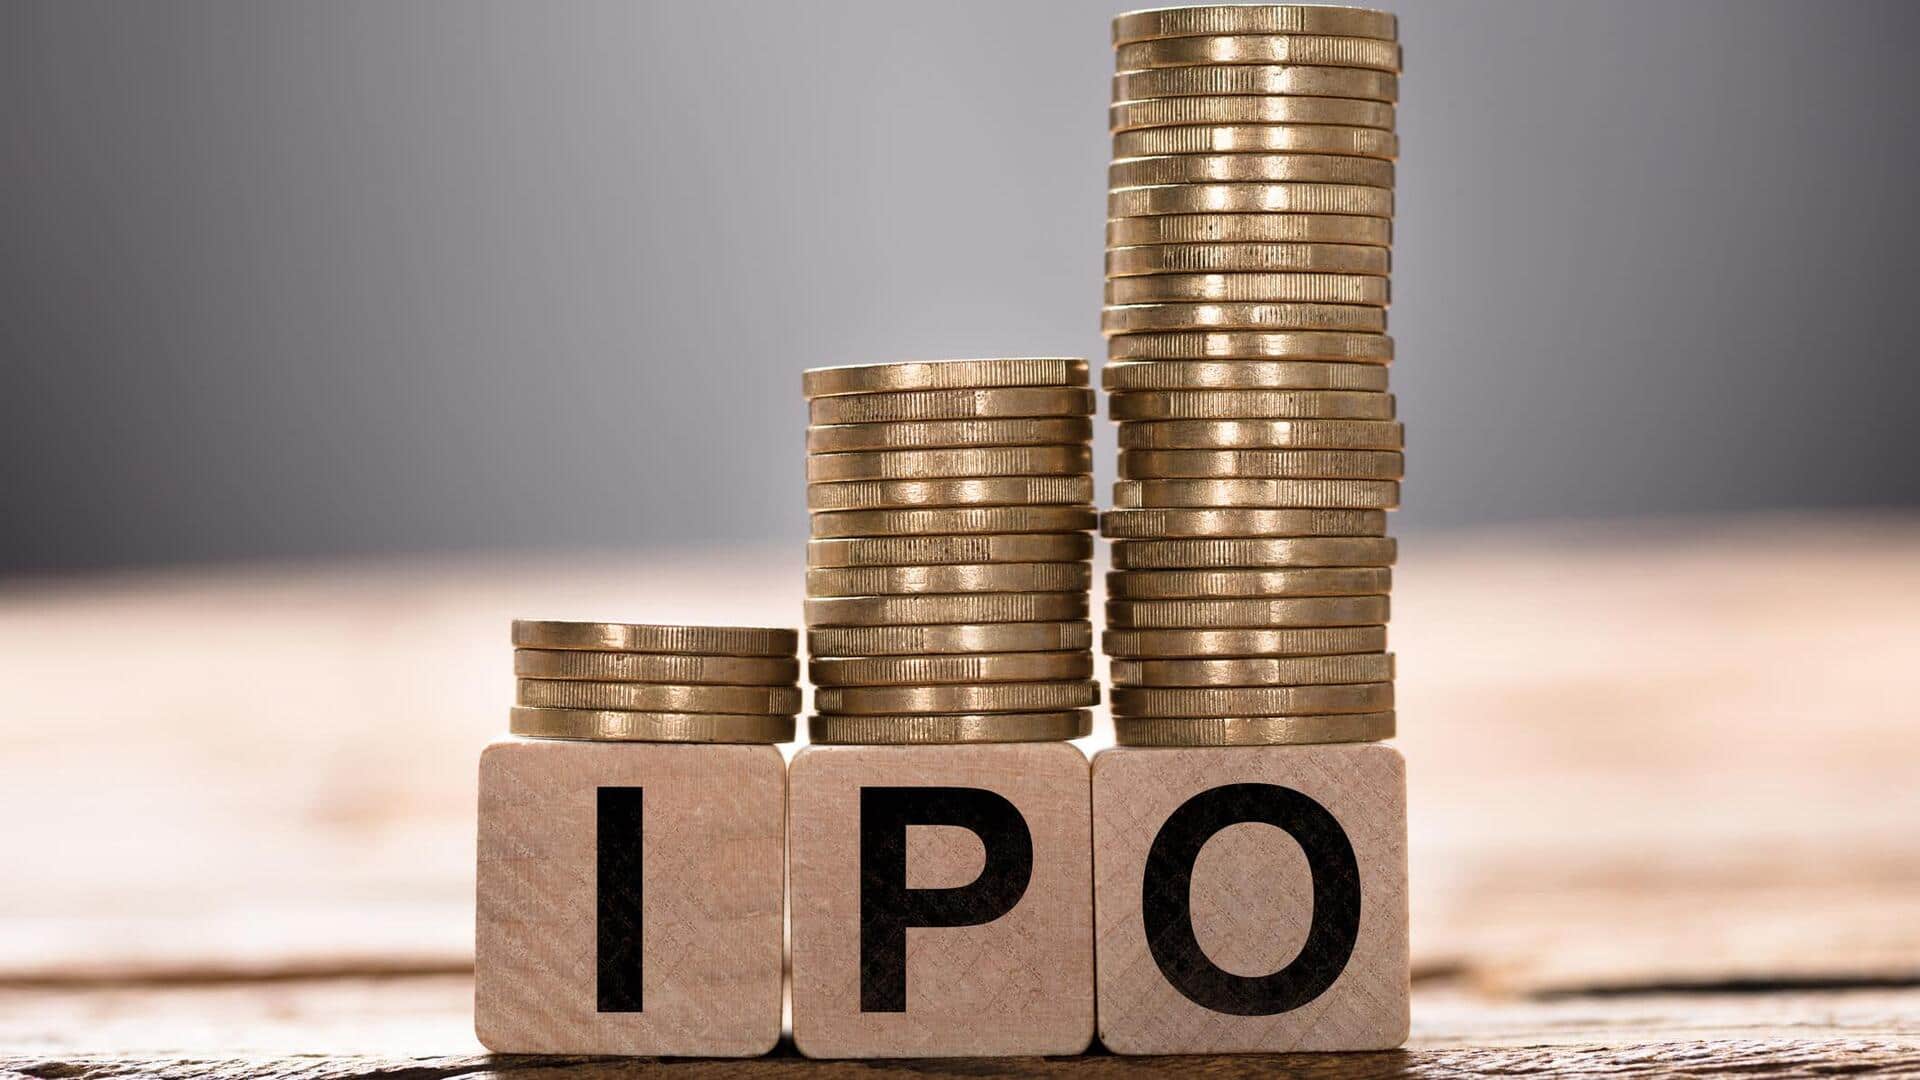 India's primary market prepares for new IPOs and listings